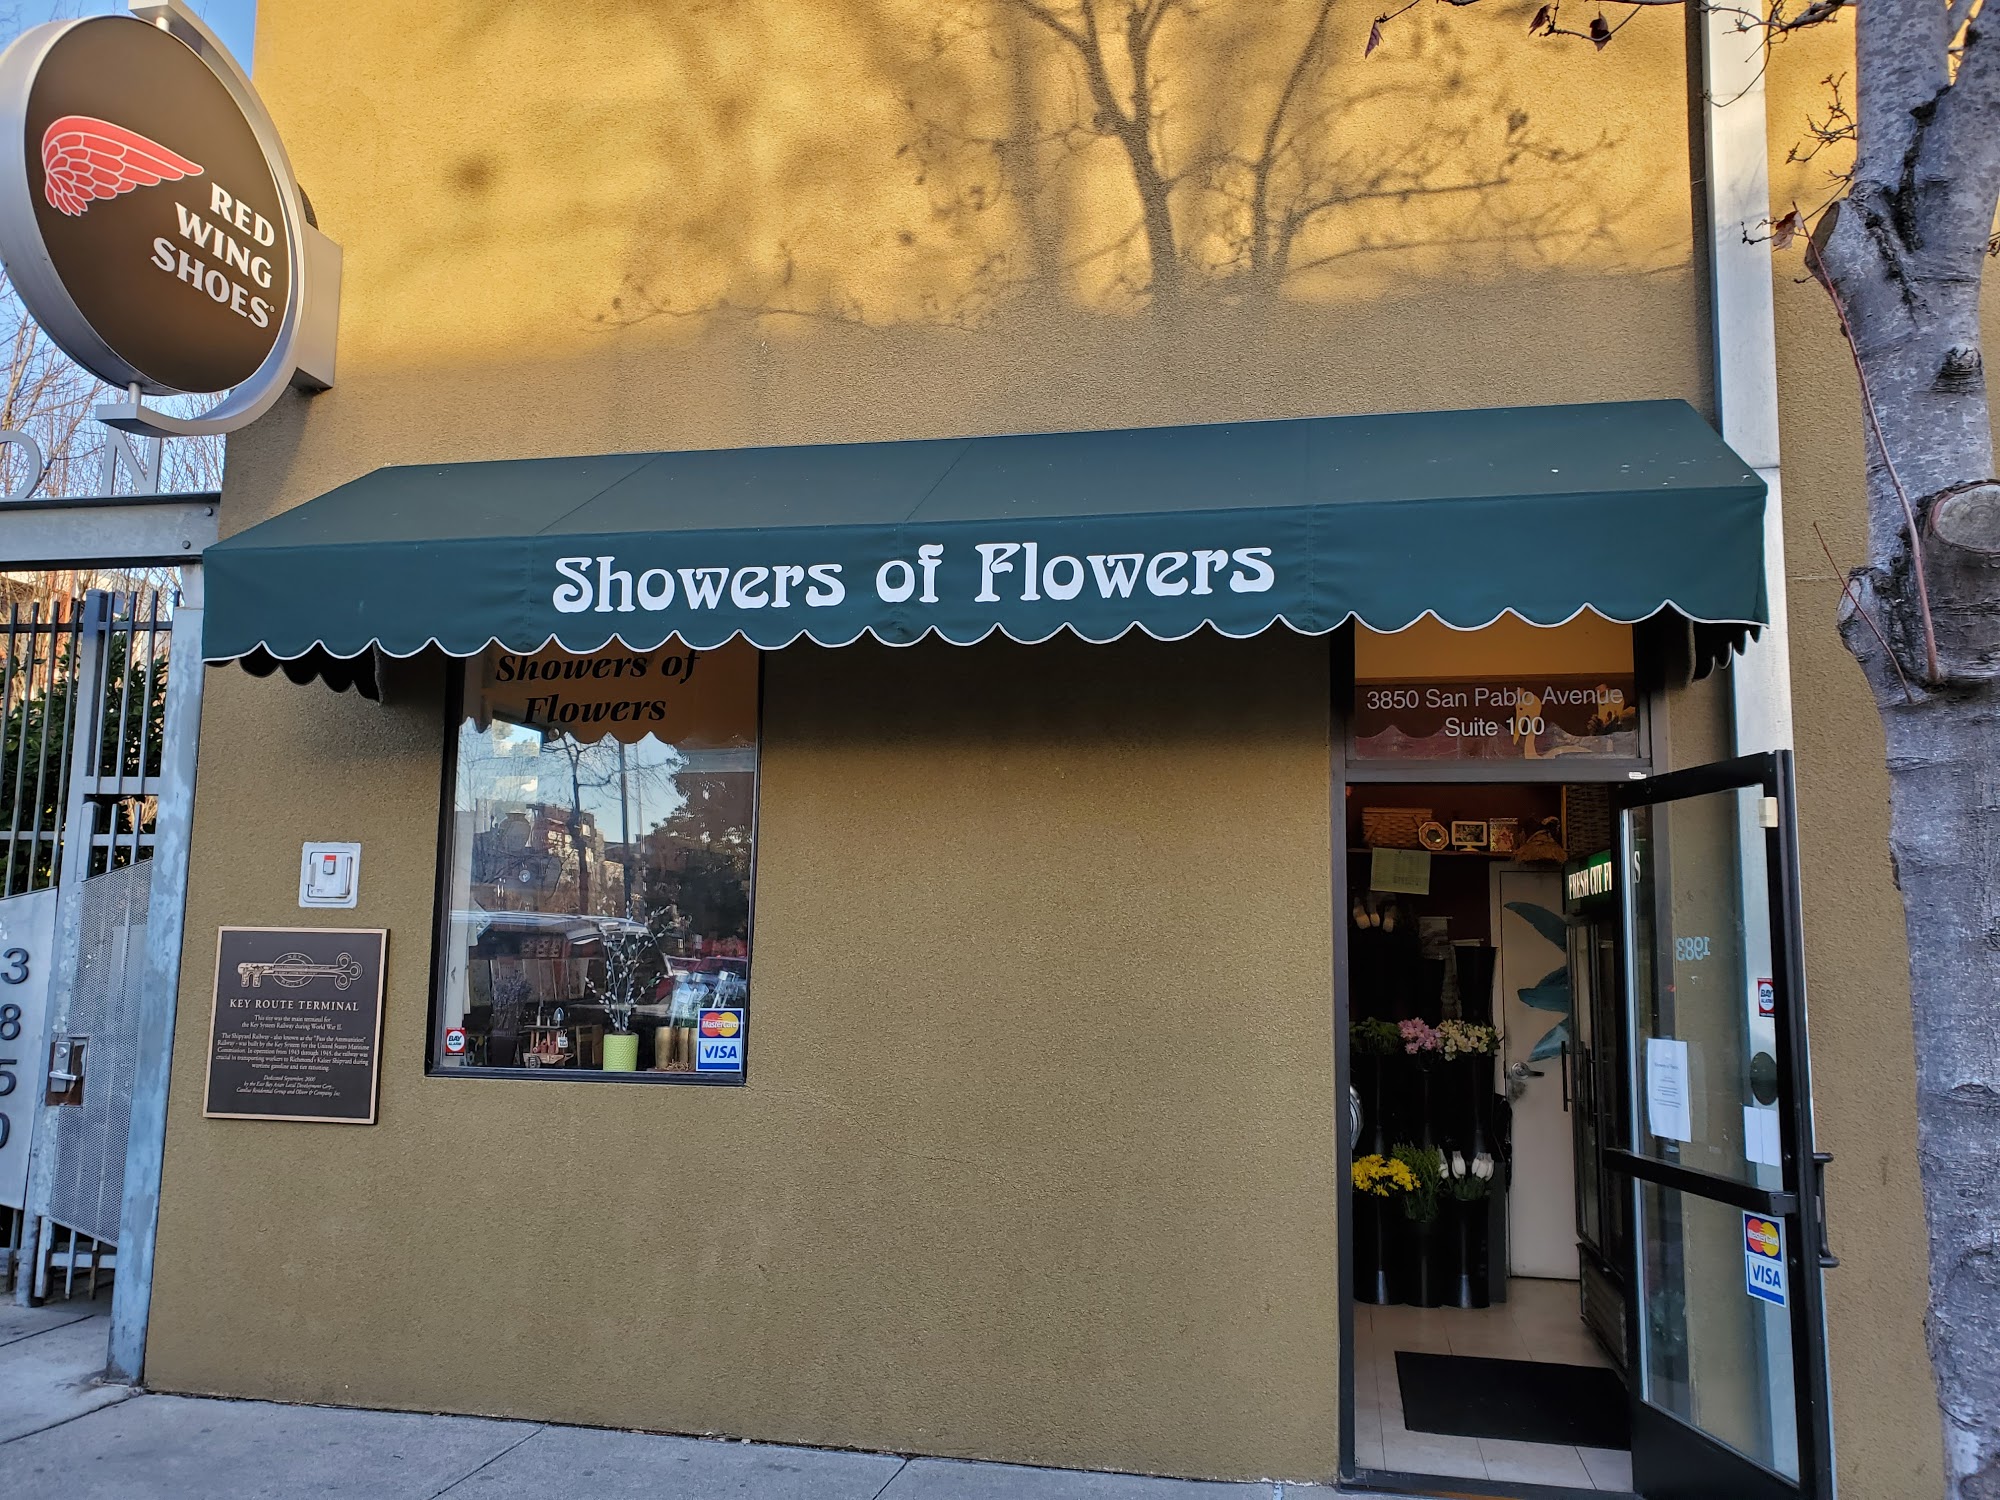 Showers of Flowers